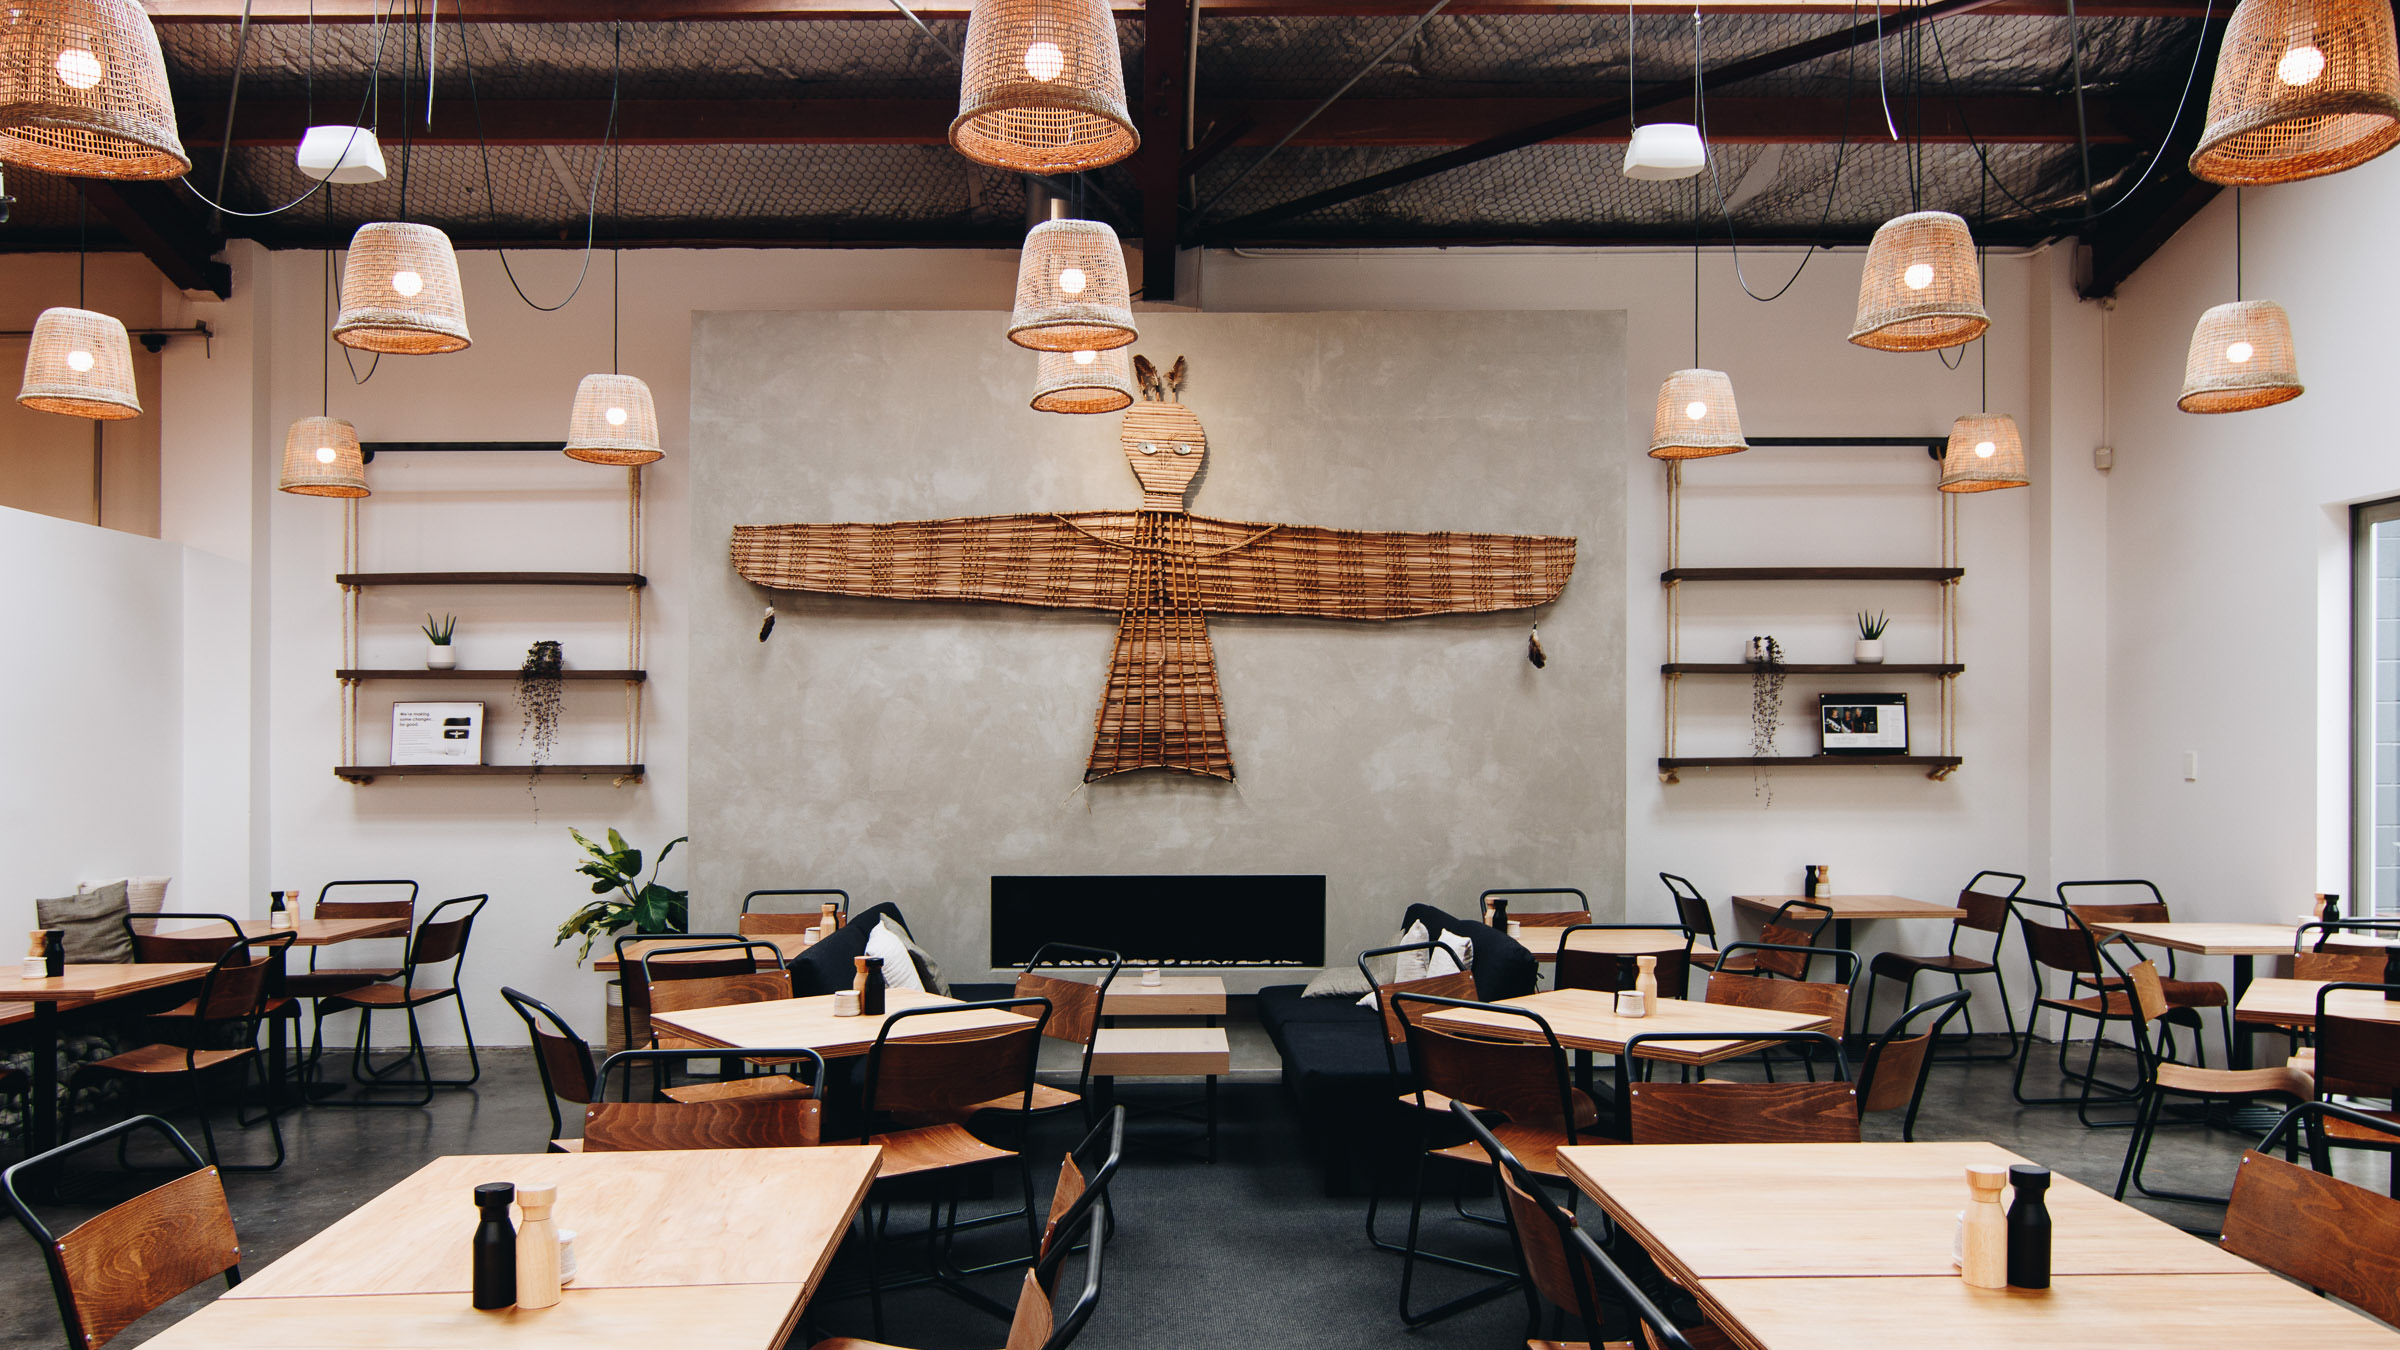 Restaurant fitout by Miller Creative